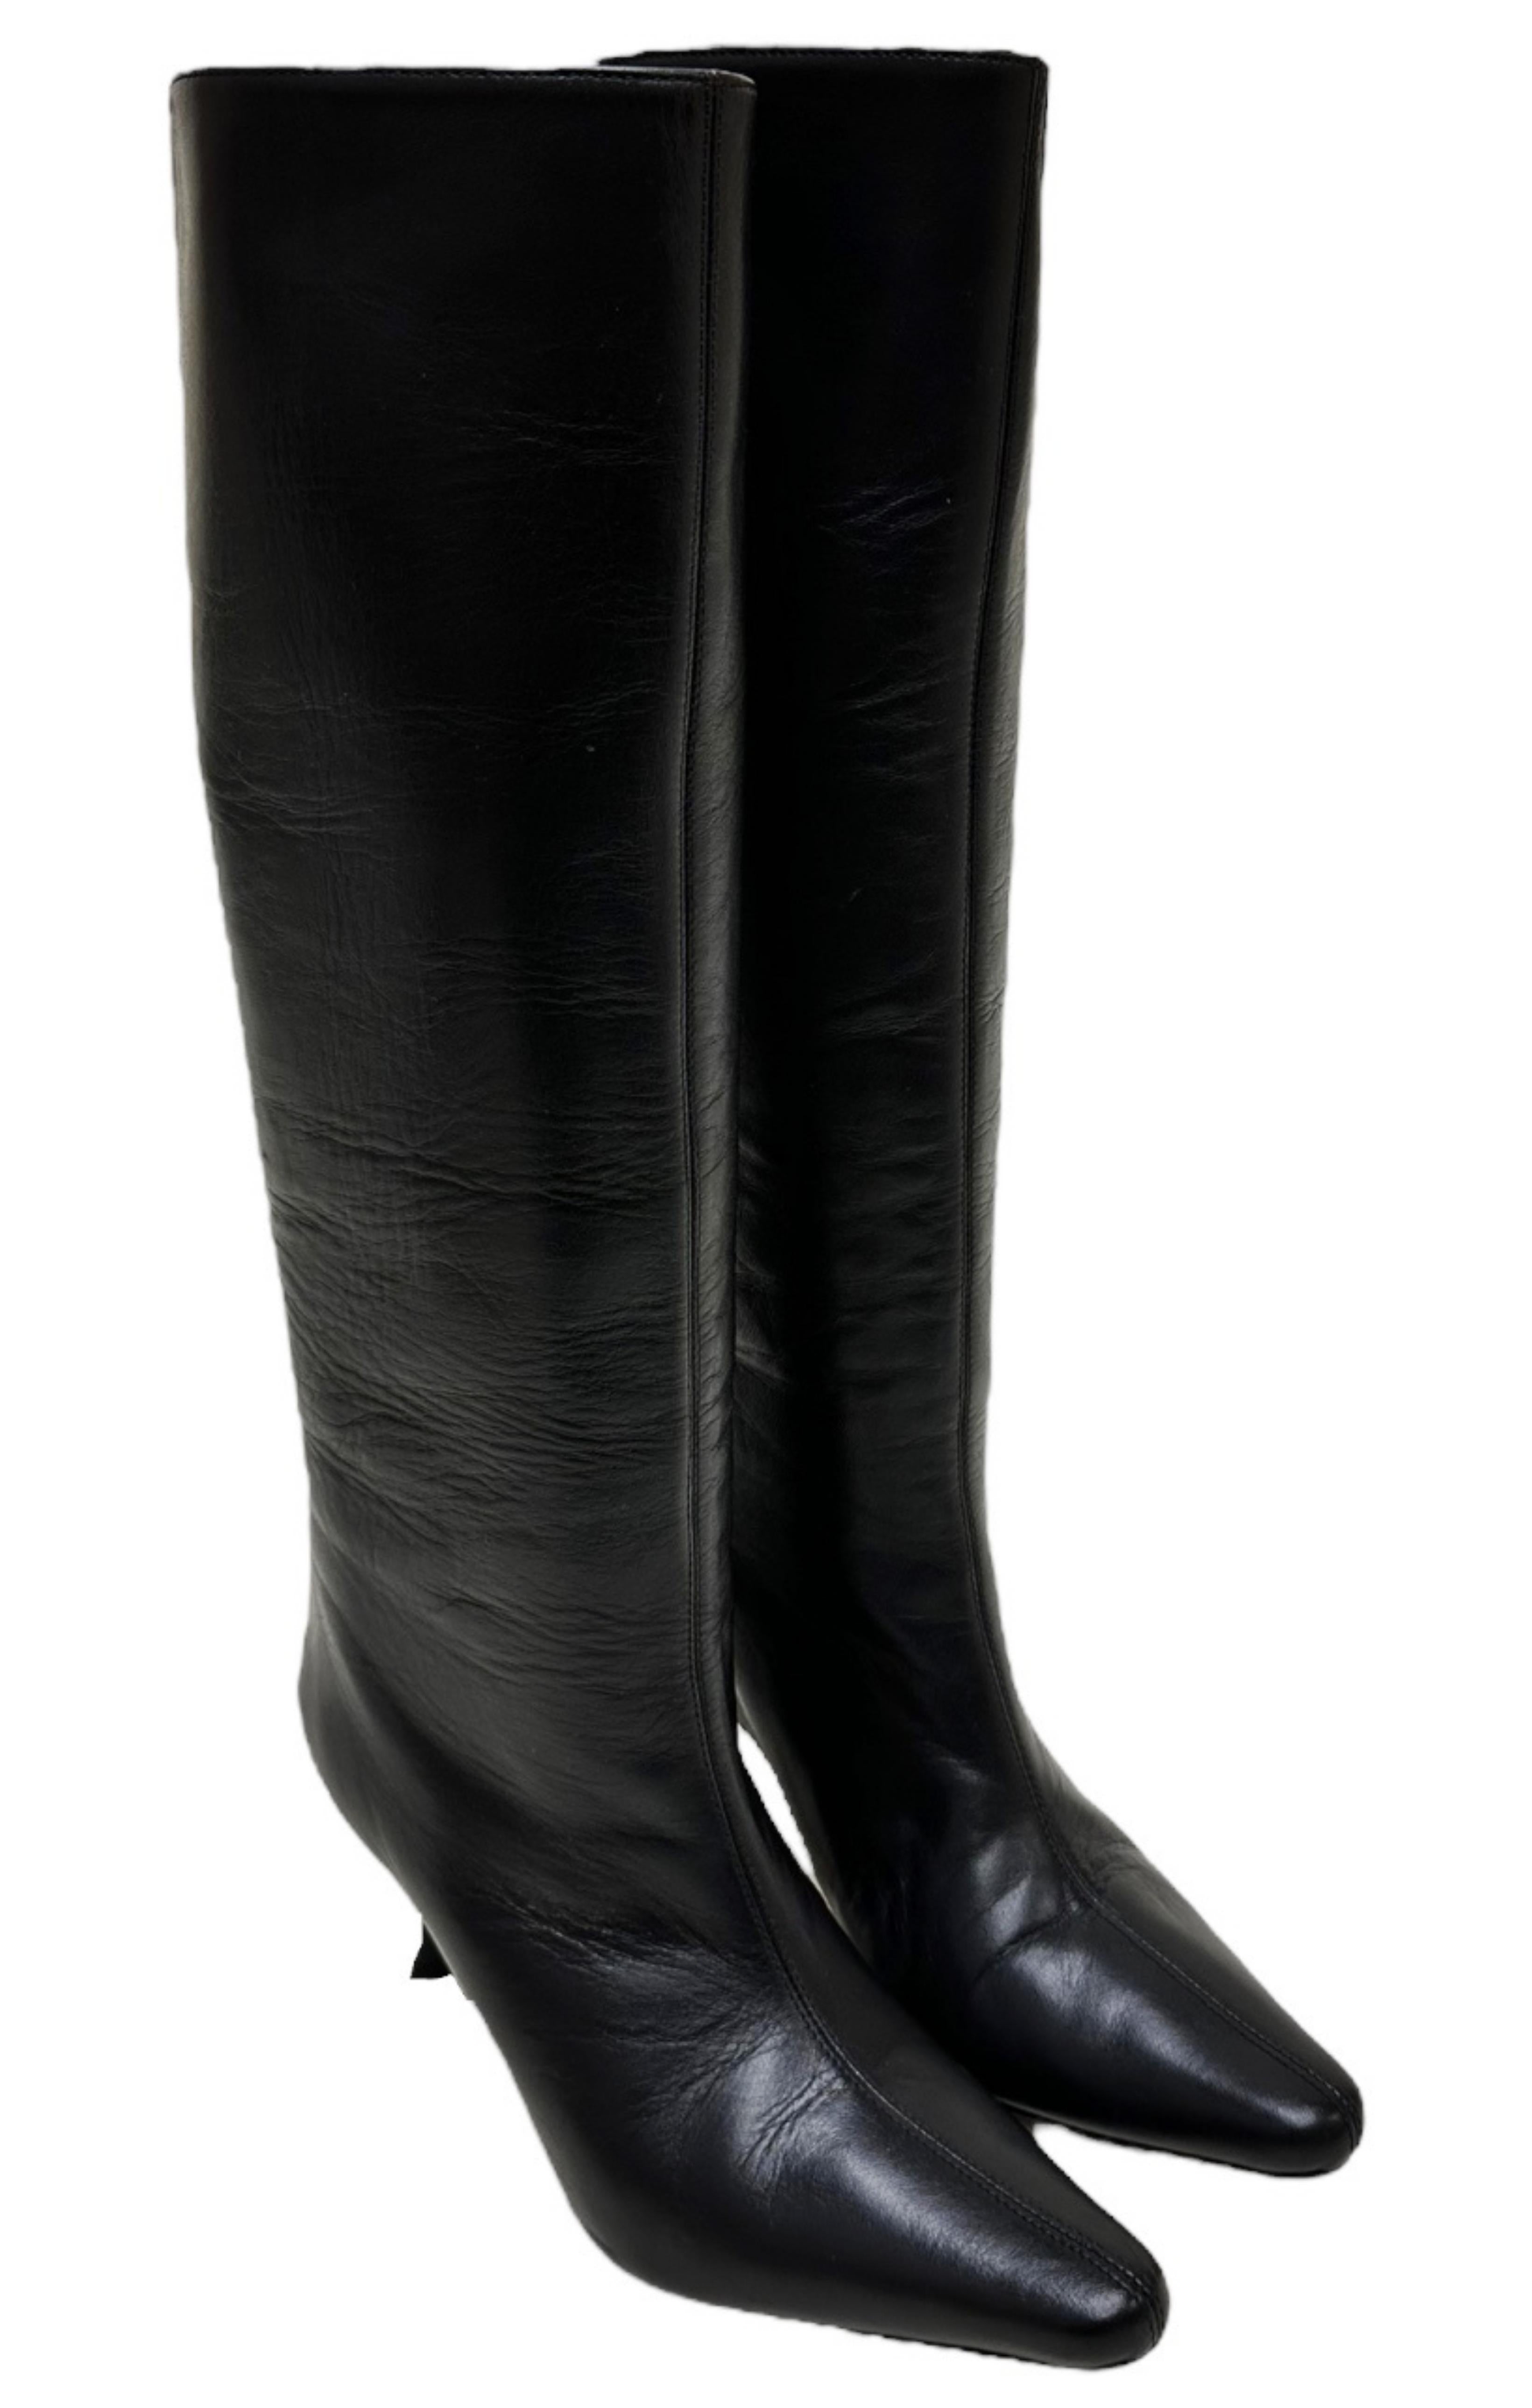 BY FAR Boots Size: EUR 35 / Fit like US 5